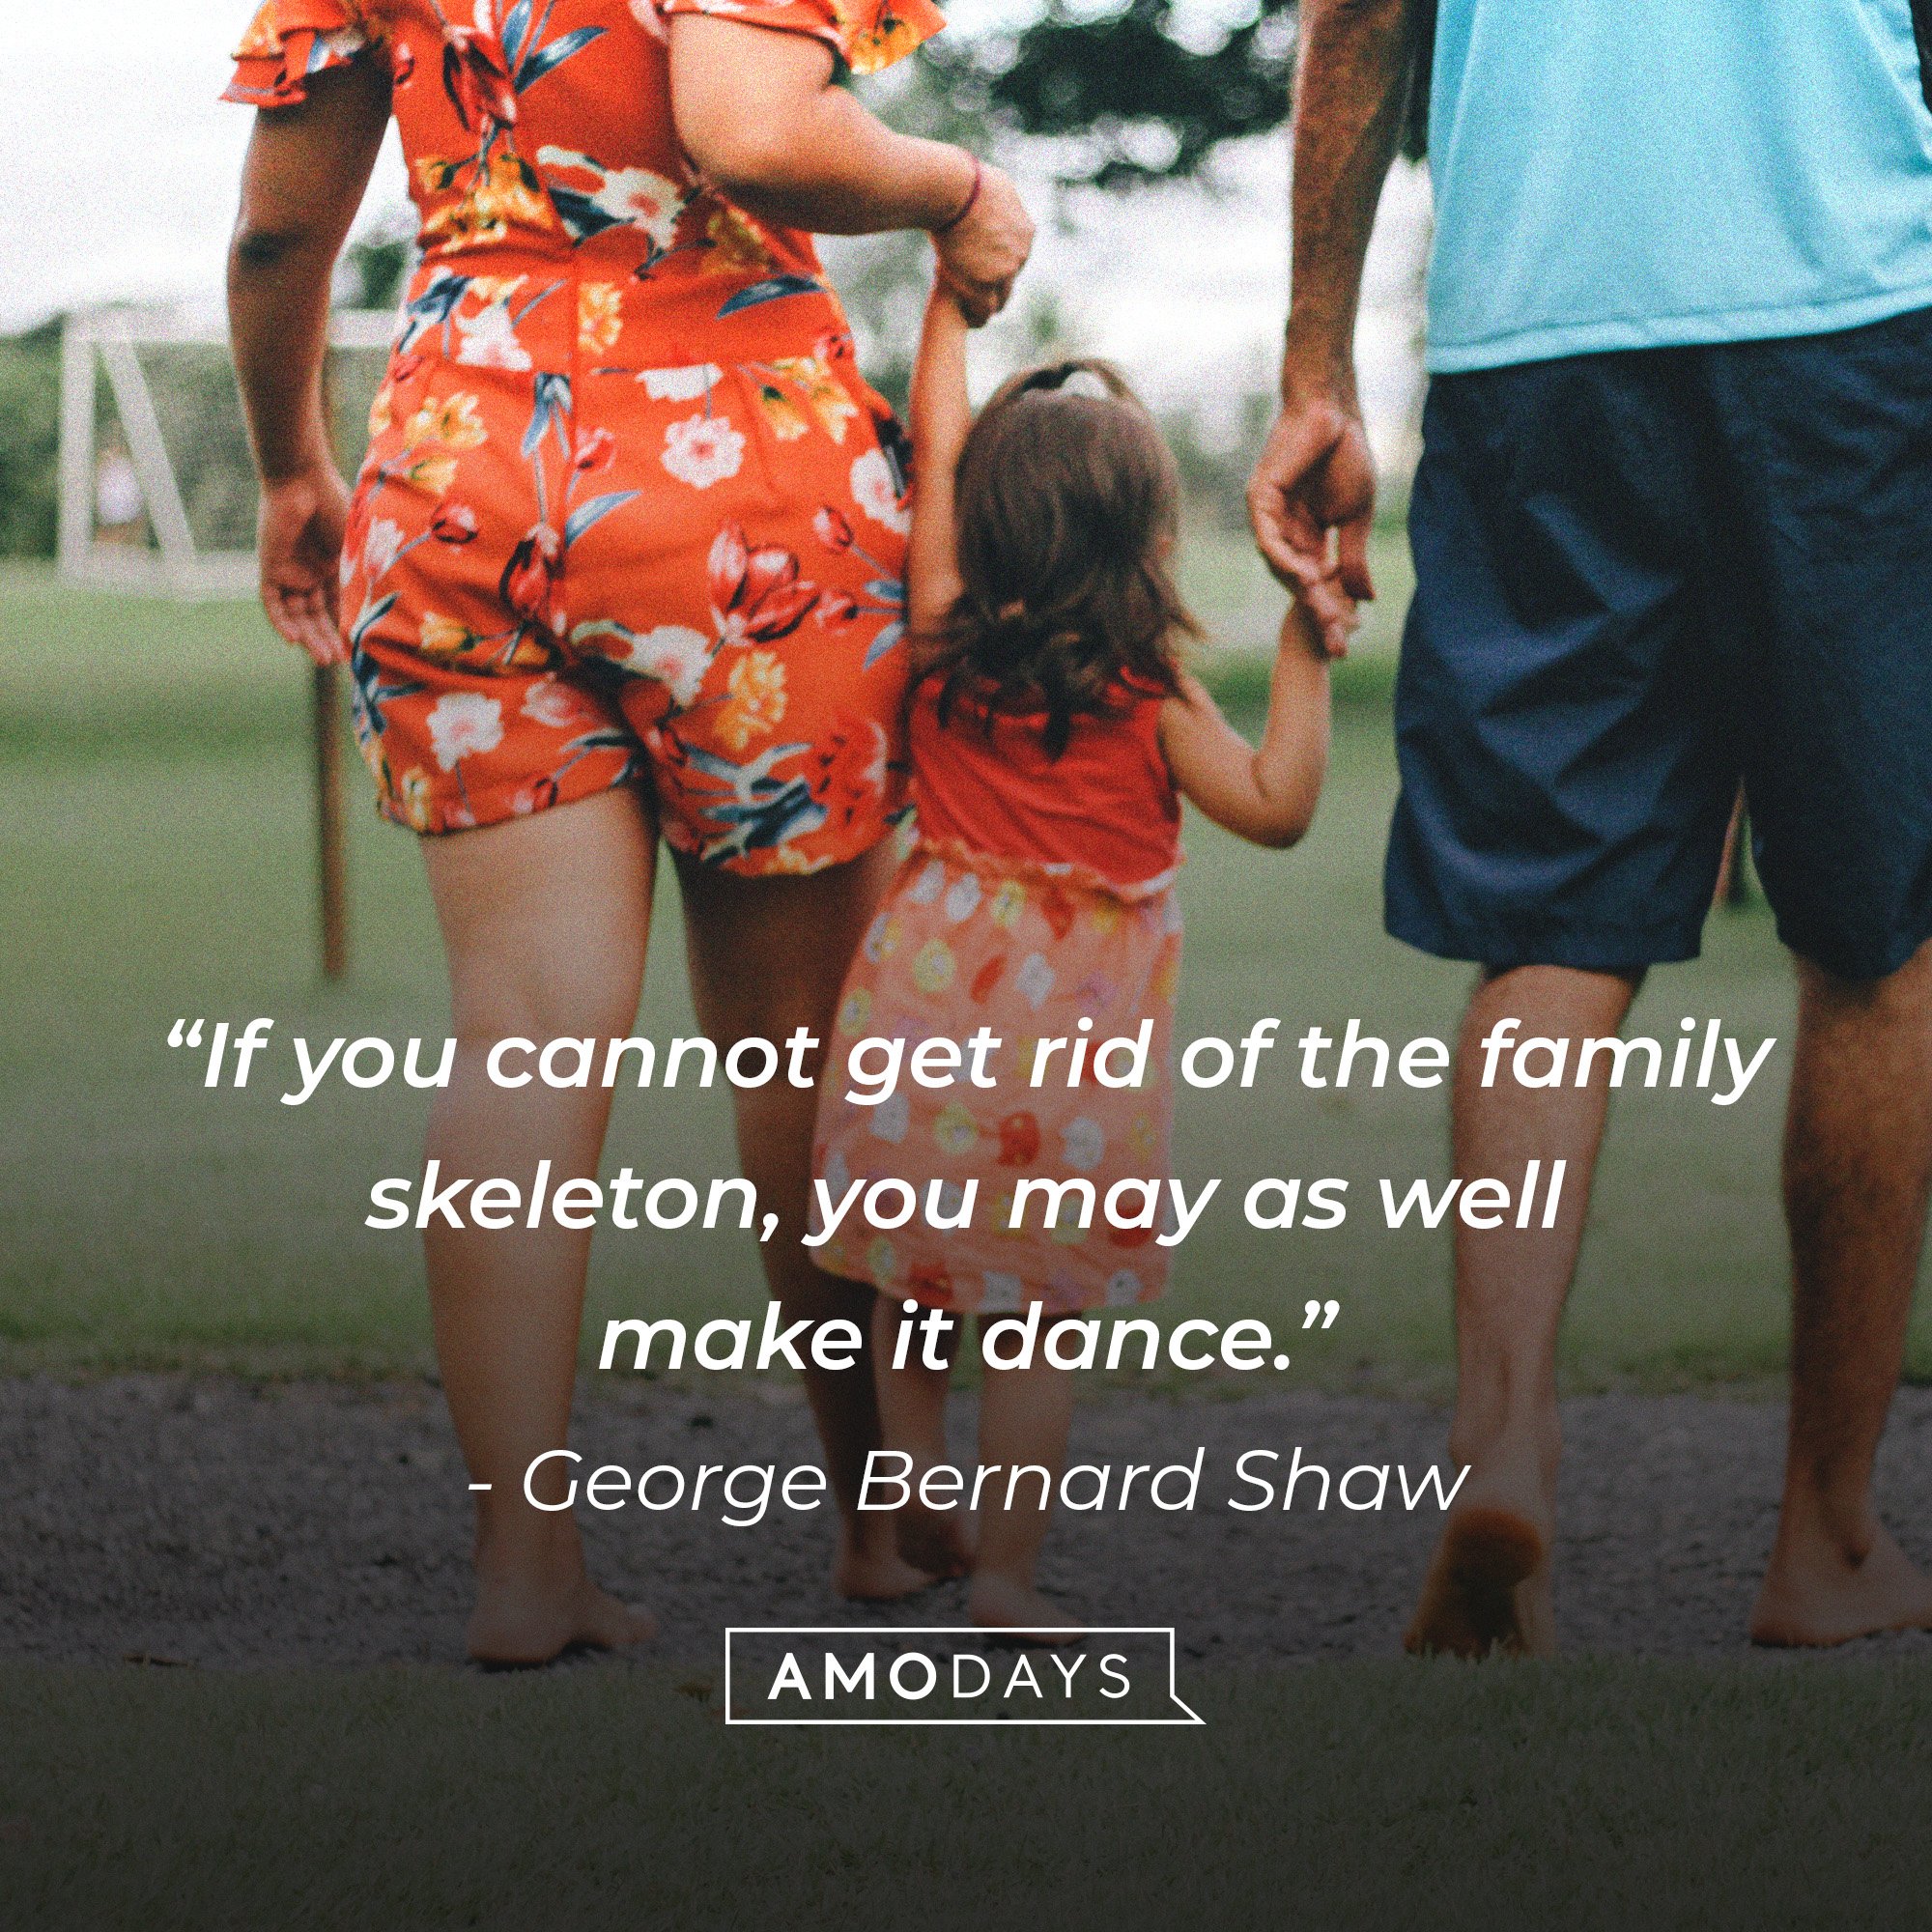 George Bernard Shaw's quote: “If you cannot get rid of the family skeleton, you may as well make it dance.” | Image: AmoDays